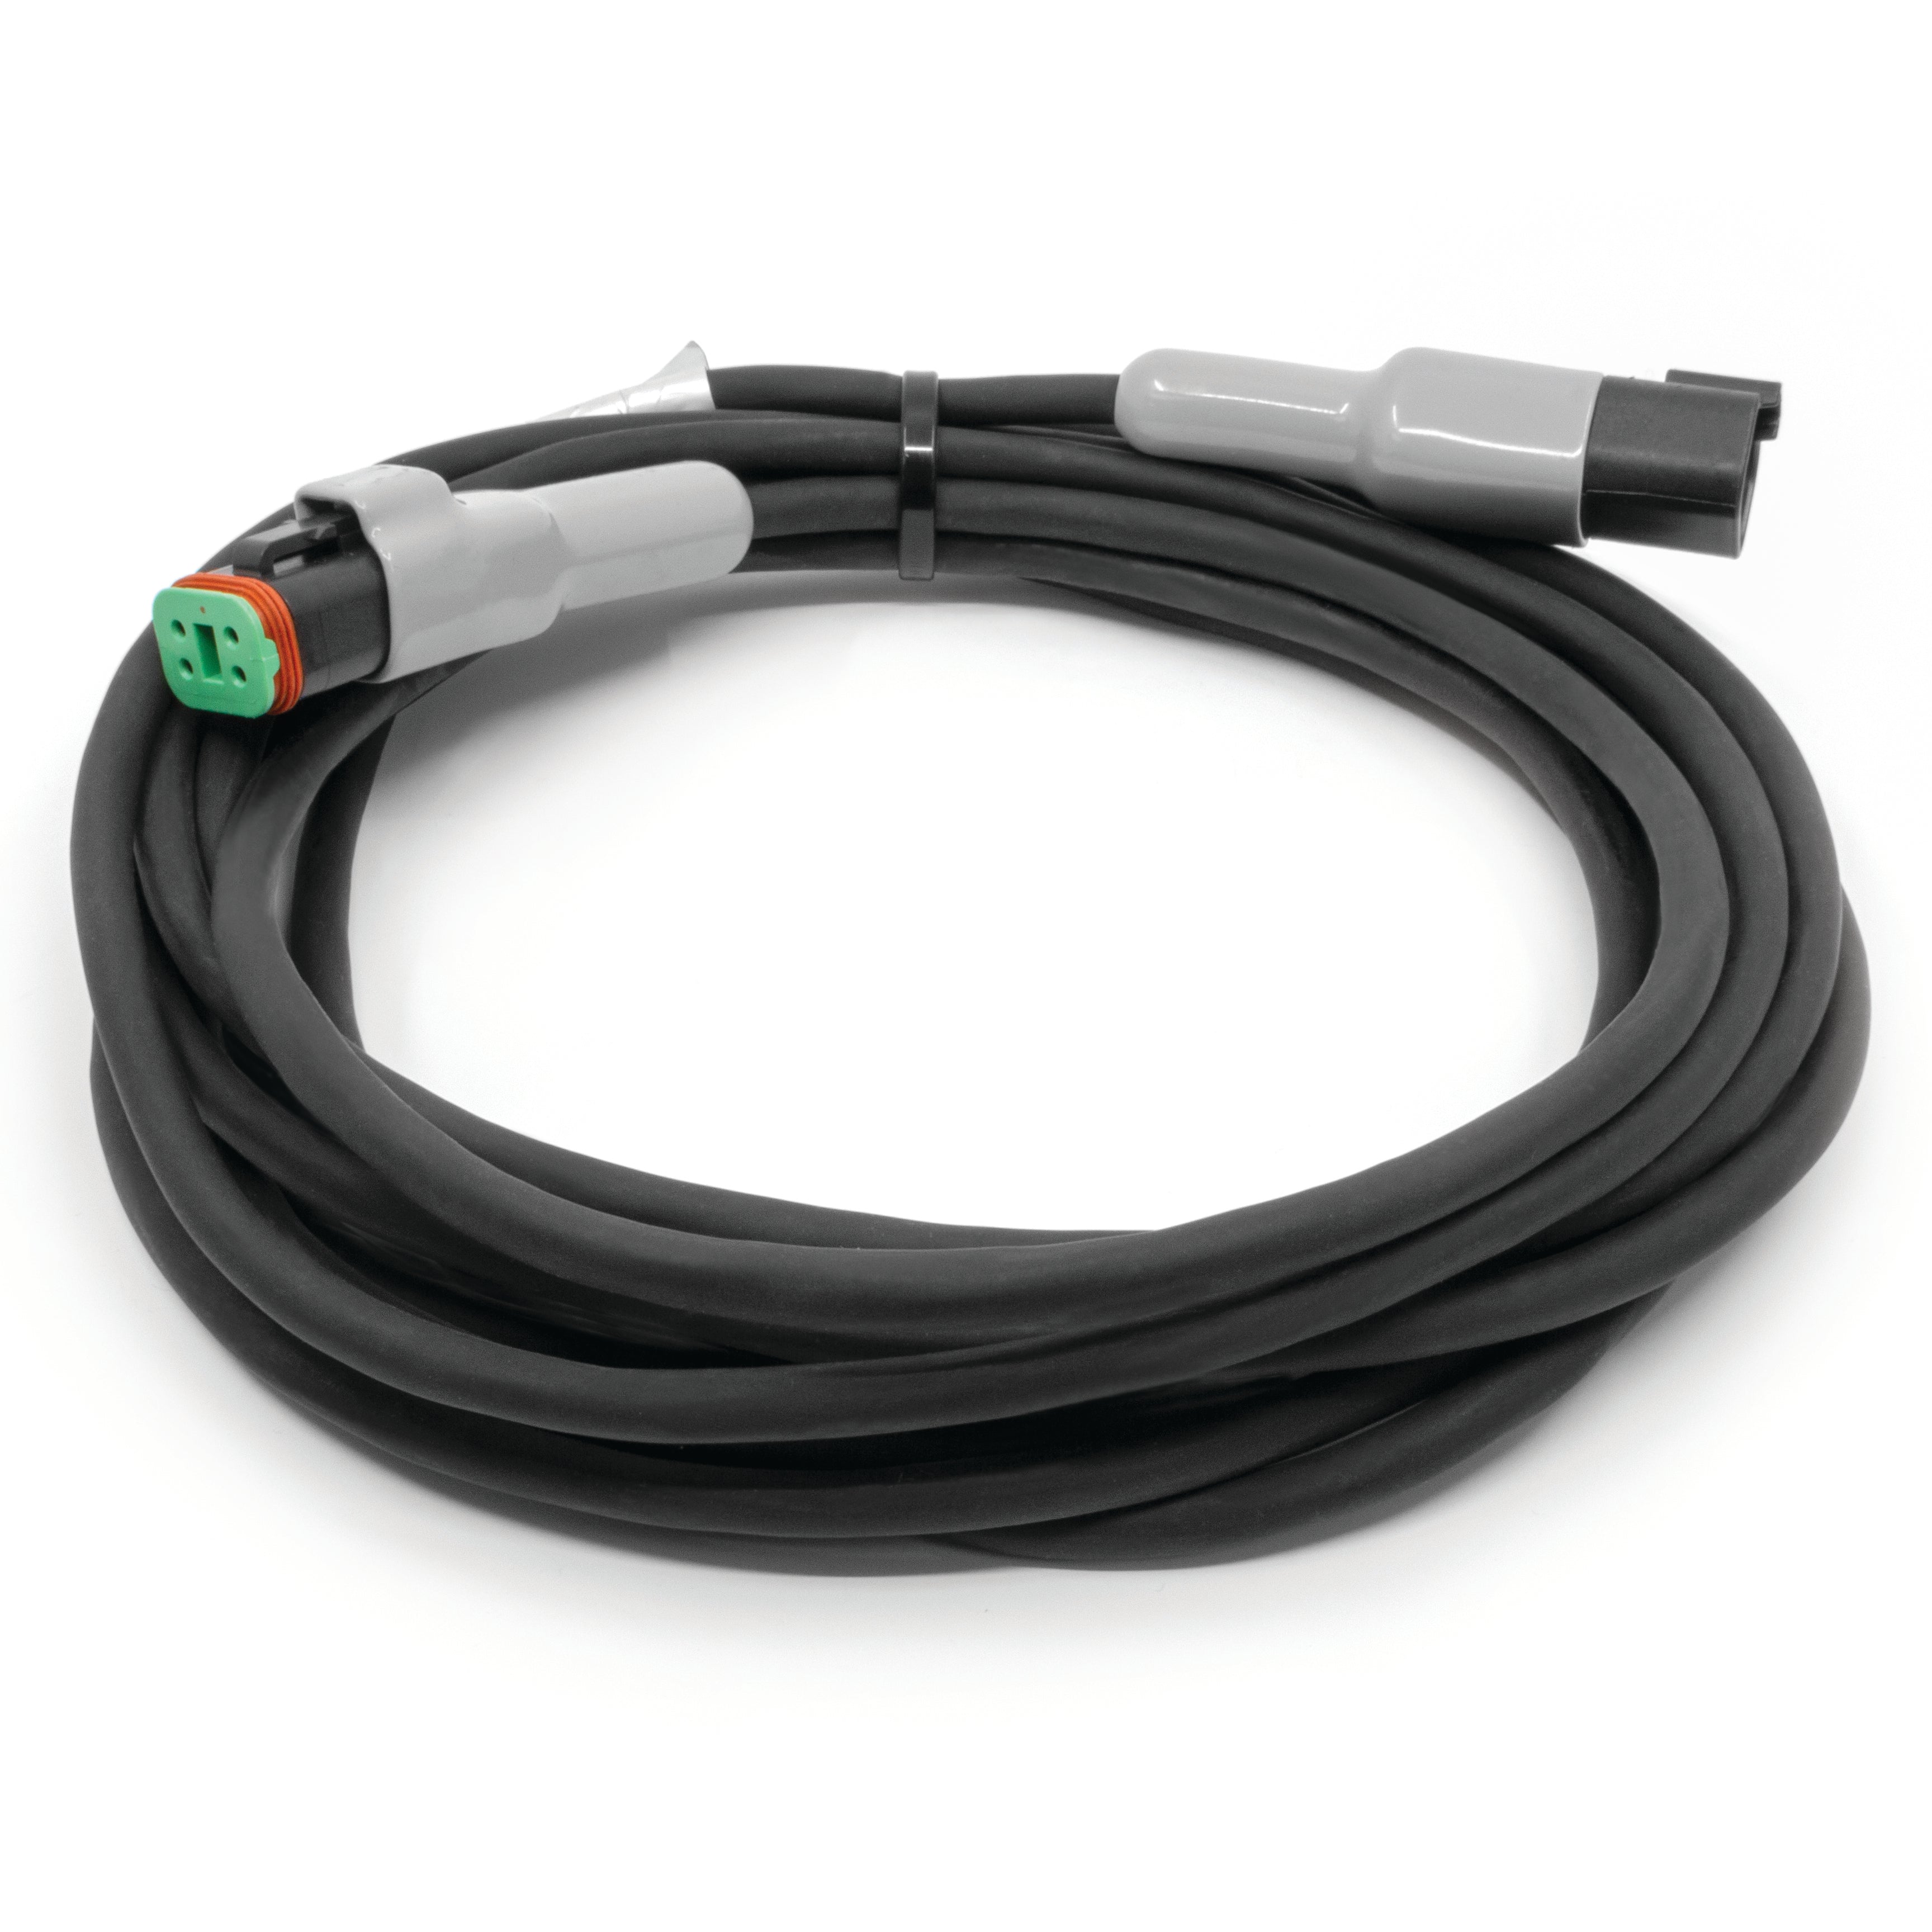 25 metre extension cable for Backsense radar detection systems